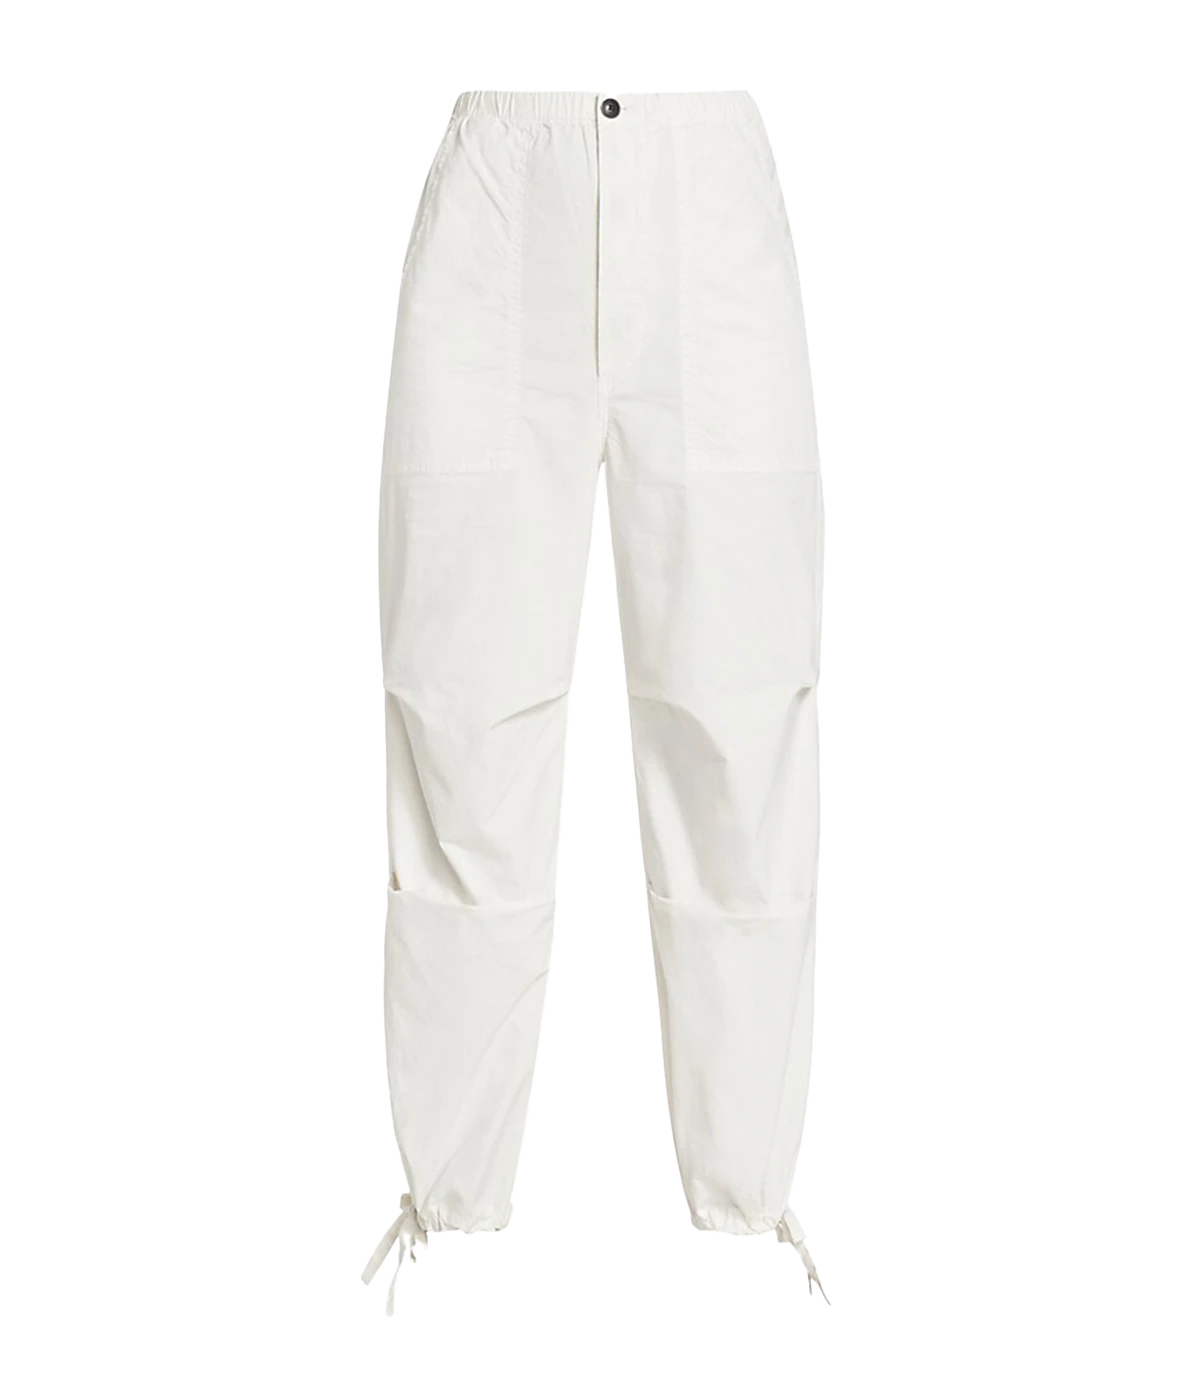 An everyday comfortable throw on and go pant, 100% cotton, parachute oversize style, Button fly closure and elastic waist, 4 pockets and drawstring ankles, white. Made in USA, comfortable, everyday pant, running errands, summer staple. 